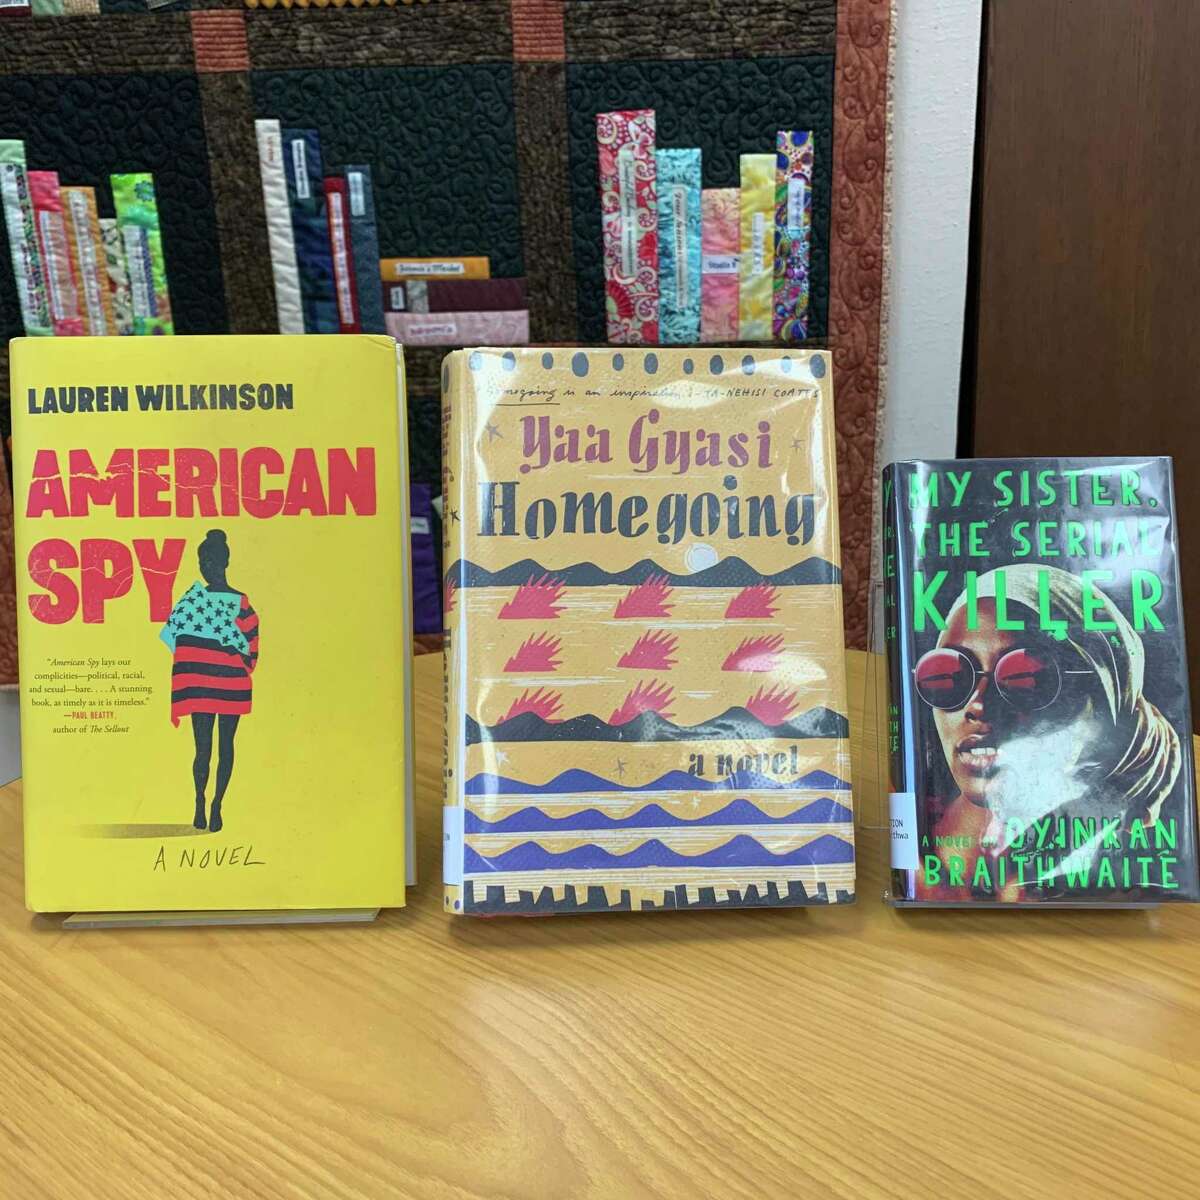 Marie Mitchell is a young, Black woman, working for the FBI who is given an opportunity to join a task force and help bring down a communist. Set in 1986 during the Cold War, "American Spy" by Lauren Wilkinson was inspired by true events. (Courtesy photo)